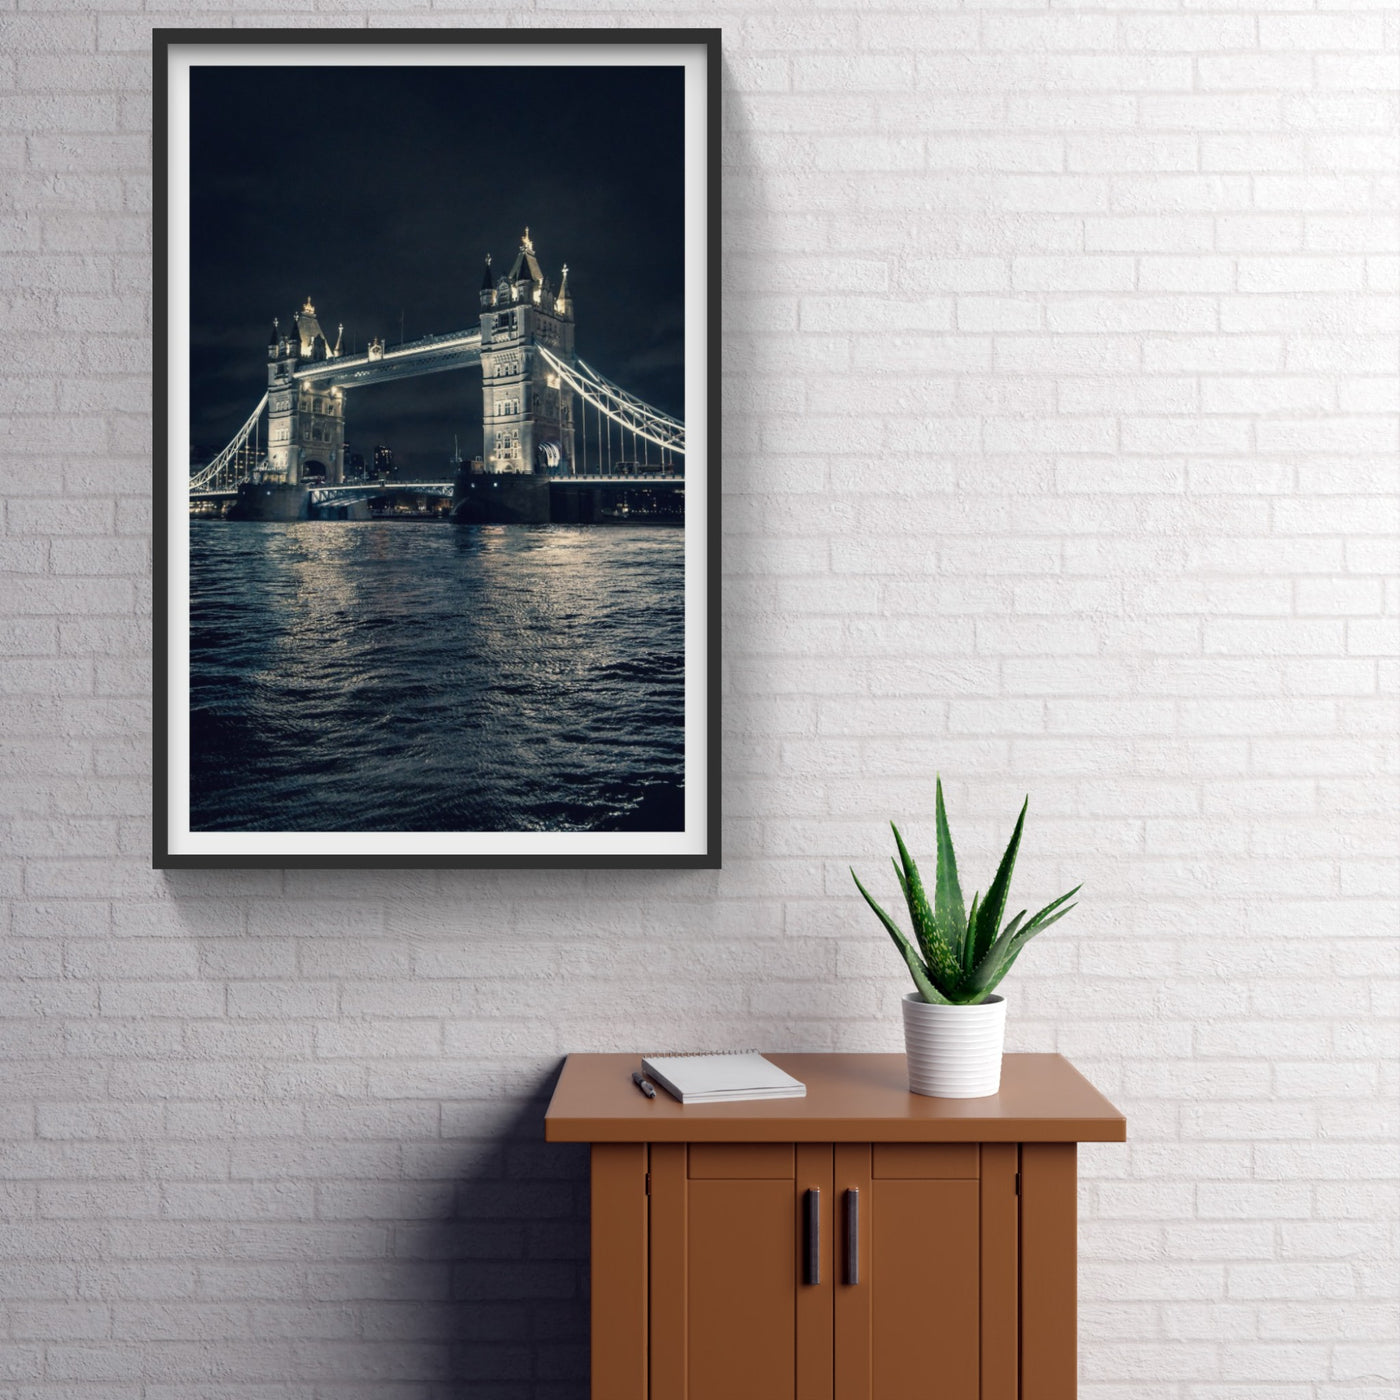 London Tower Bridge at night above the water photo hanging on white wall